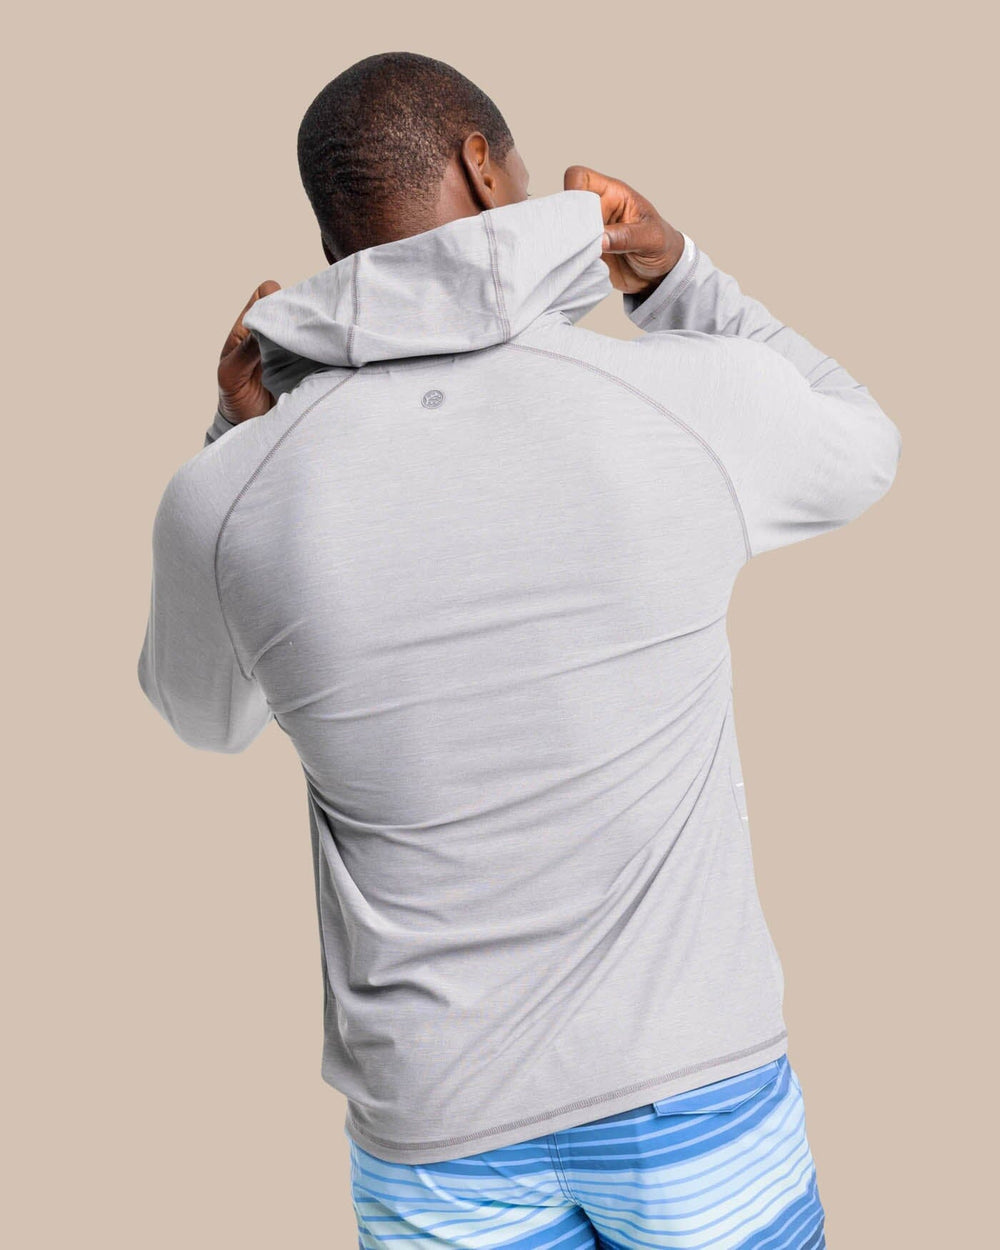 The back view of the Southern Tide brrr°®-illiant Performance Hoodie by Southern Tide - Steel Grey